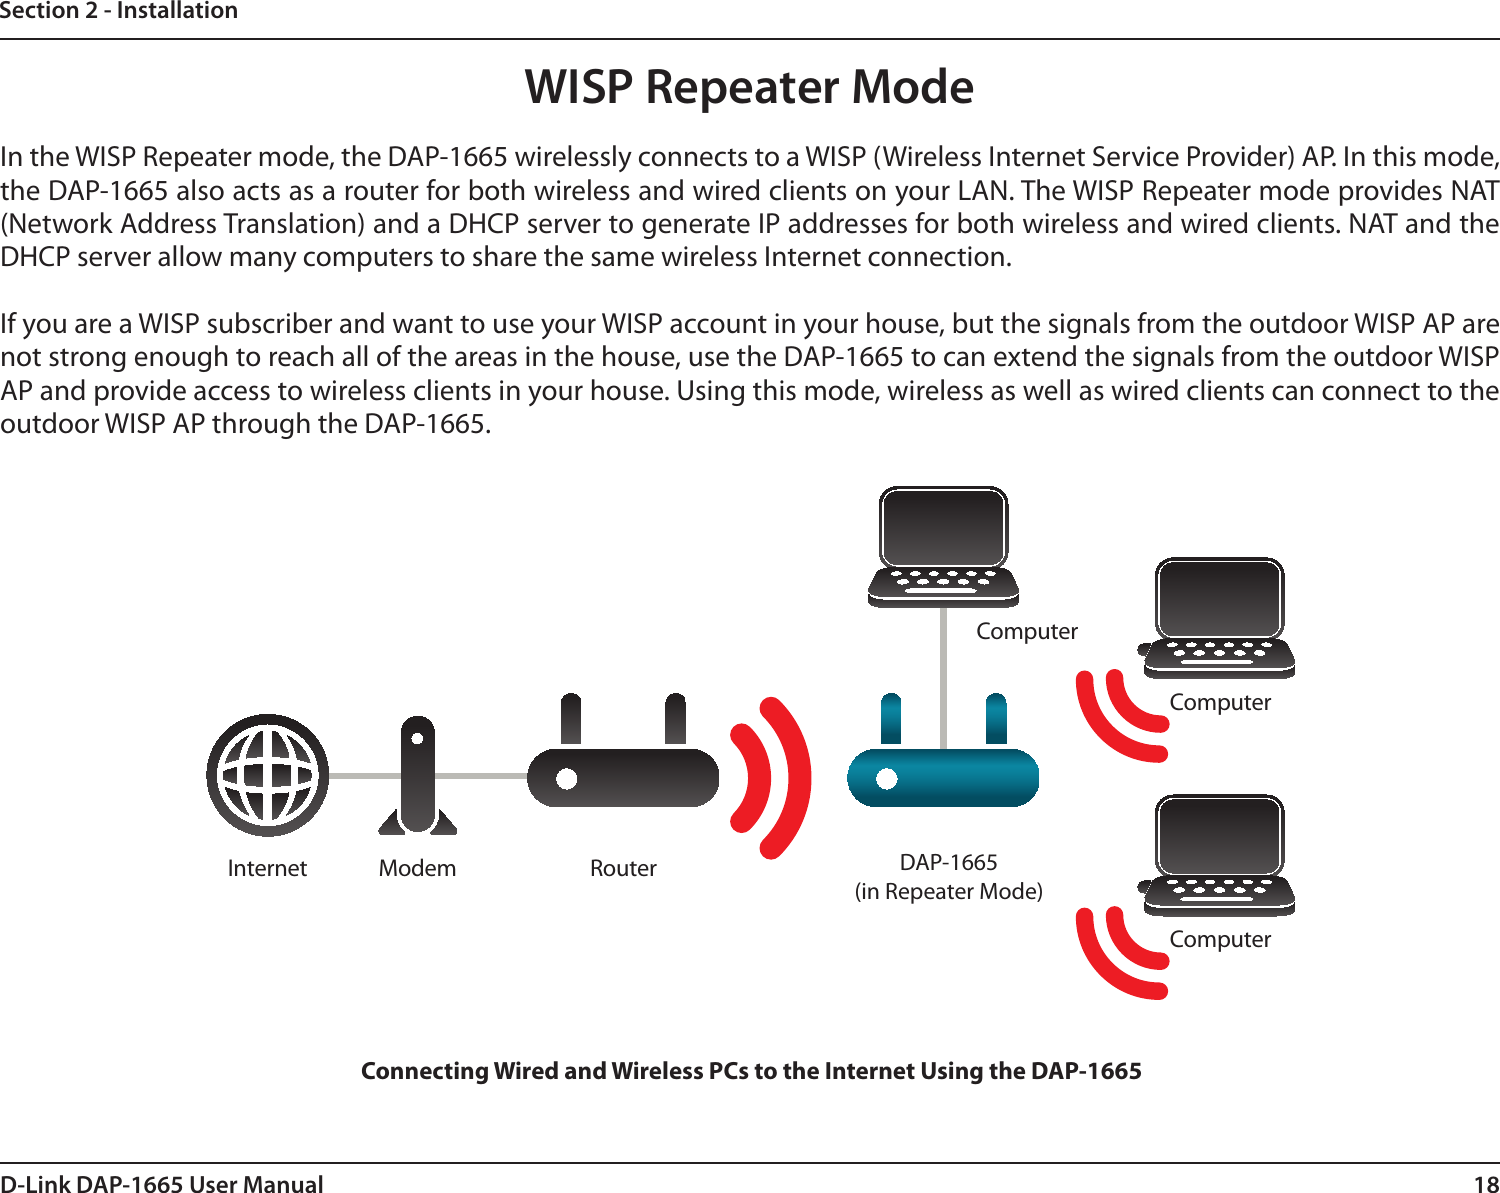 18D-Link DAP-1665 User ManualSection 2 - InstallationWISP Repeater ModeIn the WISP Repeater mode, the DAP-1665 wirelessly connects to a WISP (Wireless Internet Service Provider) AP. In this mode, the DAP-1665 also acts as a router for both wireless and wired clients on your LAN. The WISP Repeater mode provides NAT (Network Address Translation) and a DHCP server to generate IP addresses for both wireless and wired clients. NAT and the DHCP server allow many computers to share the same wireless Internet connection.If you are a WISP subscriber and want to use your WISP account in your house, but the signals from the outdoor WISP AP are not strong enough to reach all of the areas in the house, use the DAP-1665 to can extend the signals from the outdoor WISP AP and provide access to wireless clients in your house. Using this mode, wireless as well as wired clients can connect to the outdoor WISP AP through the DAP-1665.ComputerInternetModemRouterDAP-1360(In Repeater Mode)ComputerComputerConnecting Wired and Wireless PCs to the Internet Using the DAP-1665DAP-1665(in Repeater Mode)